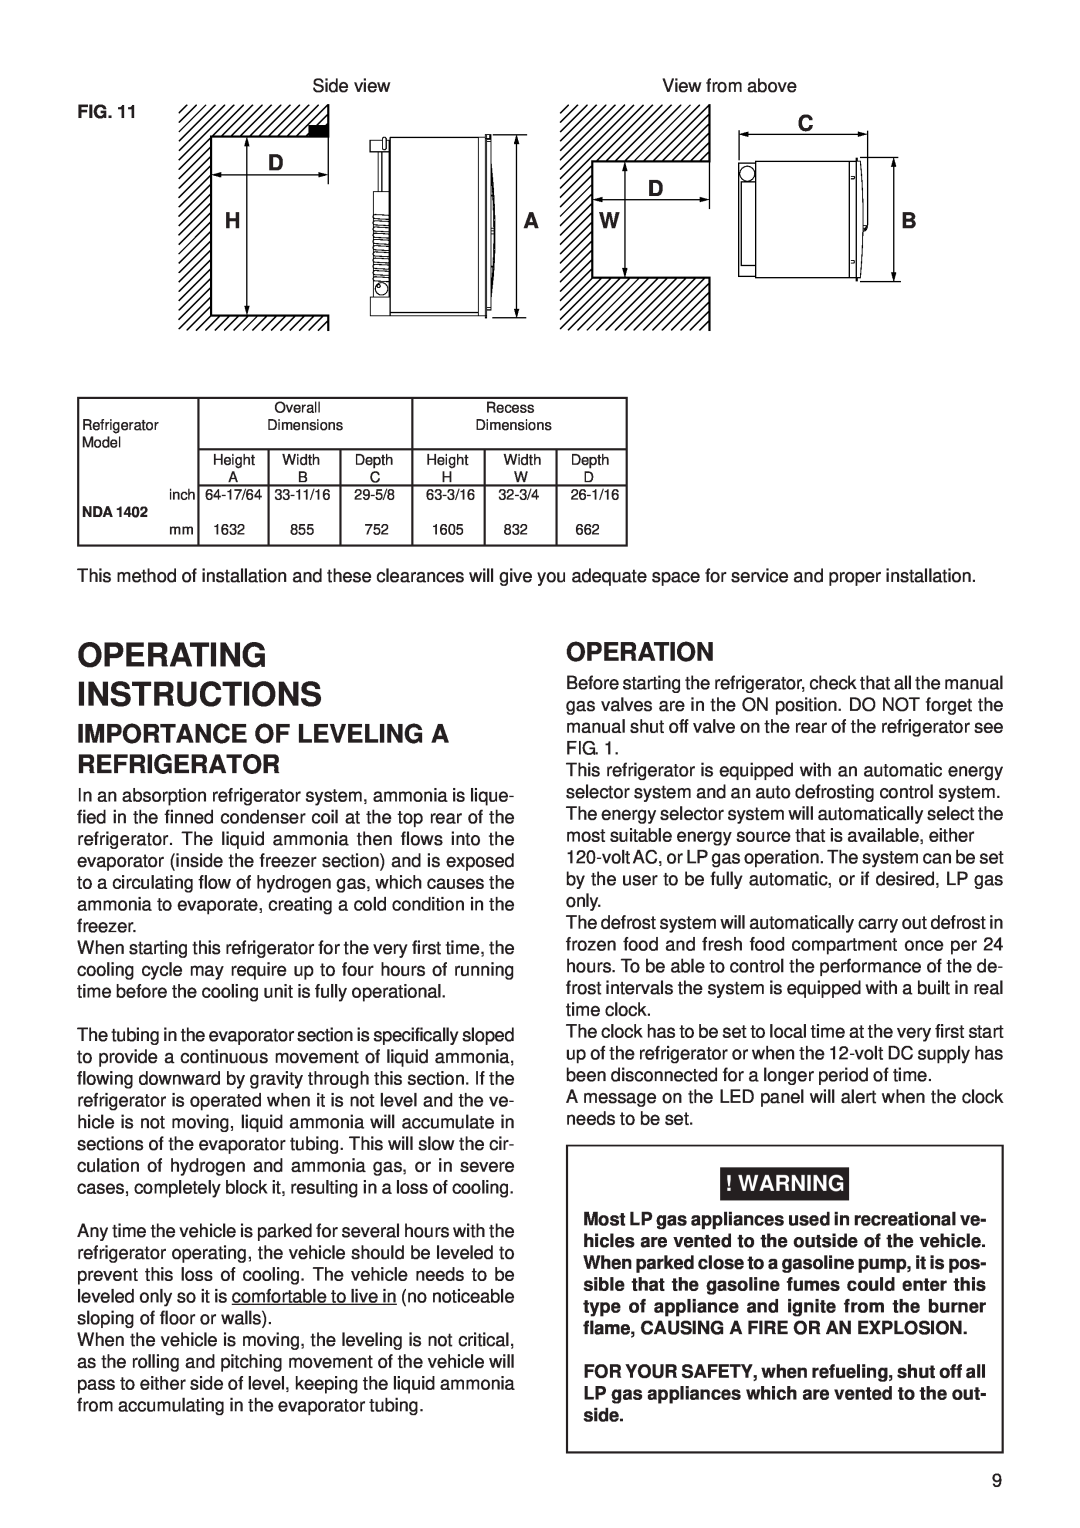 Dometic NDA1402 manual Importance Of Leveling A Refrigerator, Operation, C D A W, Operating Instructions 